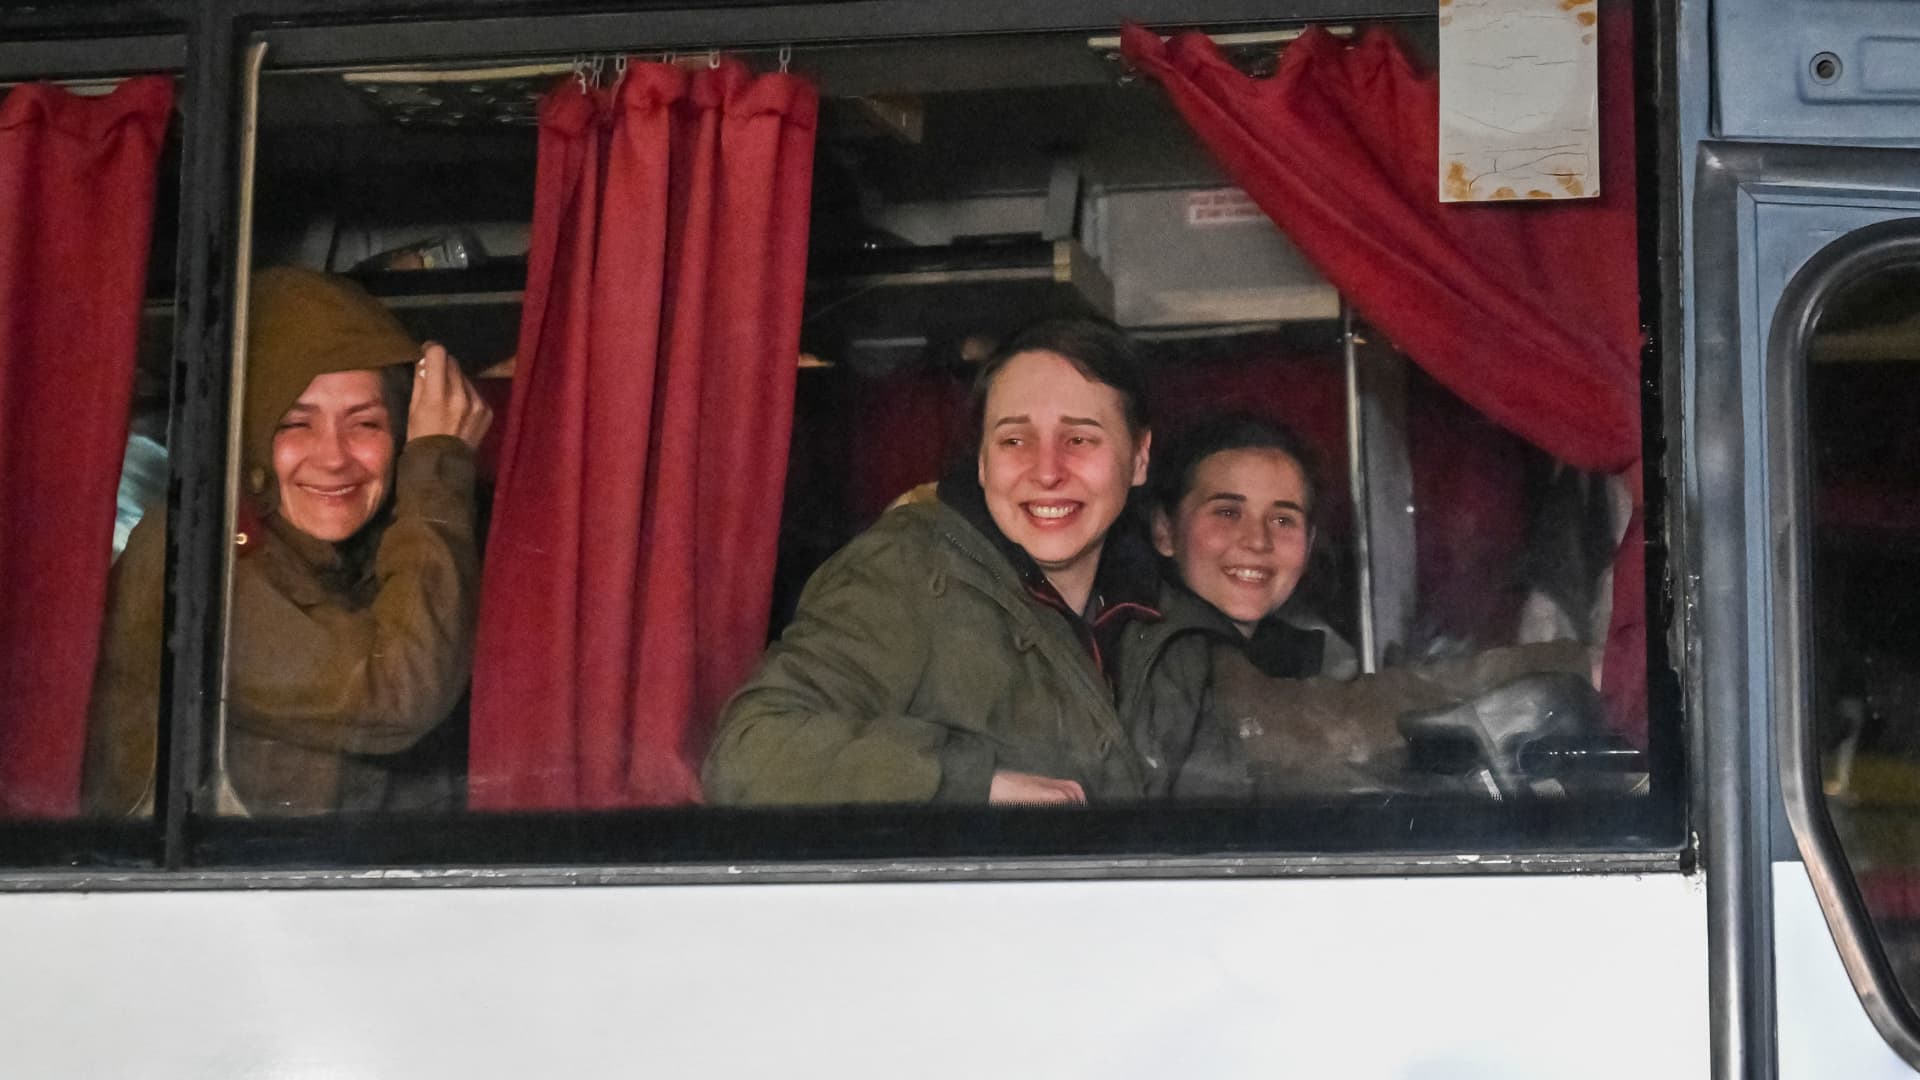 Ukrainian prisoners of war (POWs) look out of a bus window, amid Russia's attack on Ukraine, as they arrive in Zaporizhzhia, Ukraine October 17, 2022.